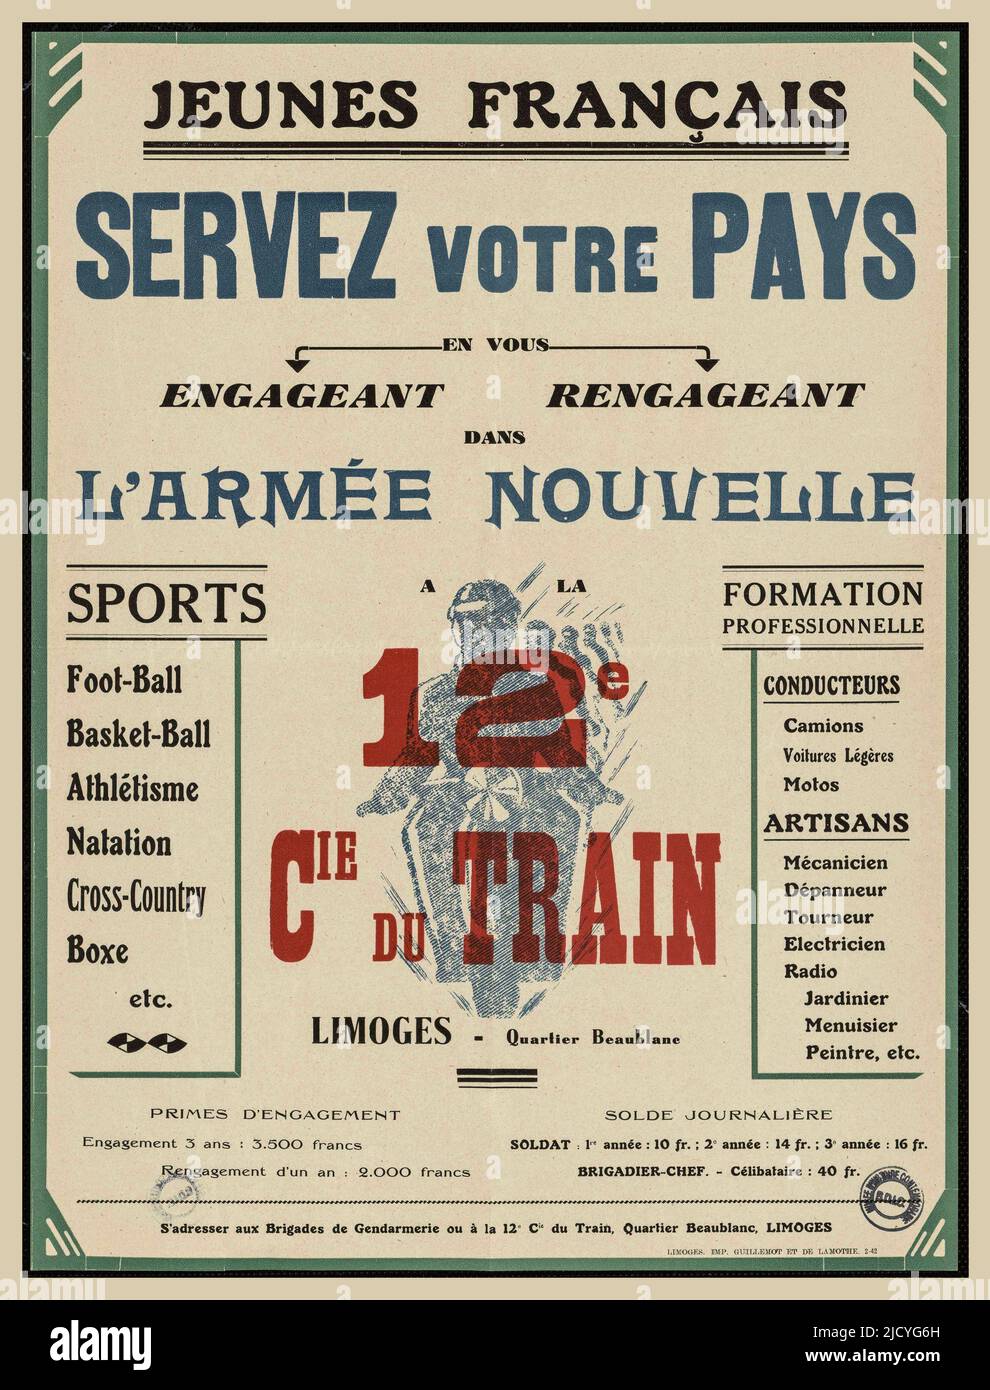 WW2 1940s Vichy French Propaganda poster VICHY FRANCE RECRUITMENT POSTER 'Young French Serve your Country'  12e Compagnie du Train  Limoges  Quartier Beaublanc Vichy France Stock Photo